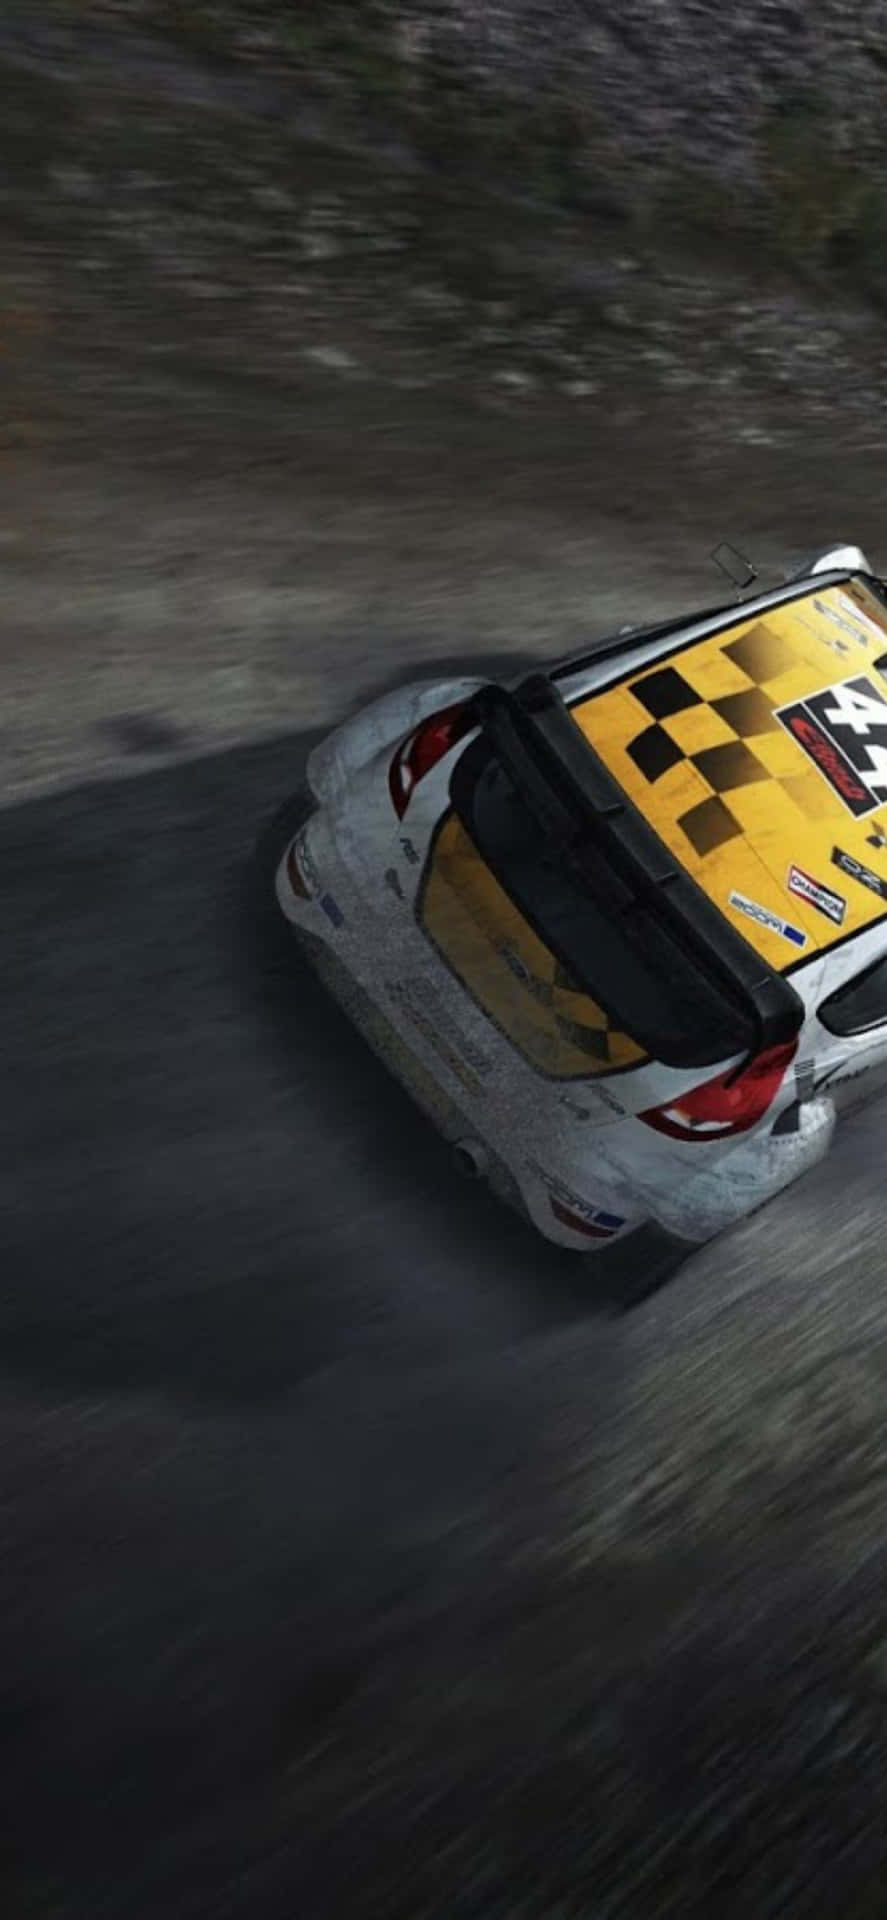 Take Control of the Race in iPhone X Dirt Rally